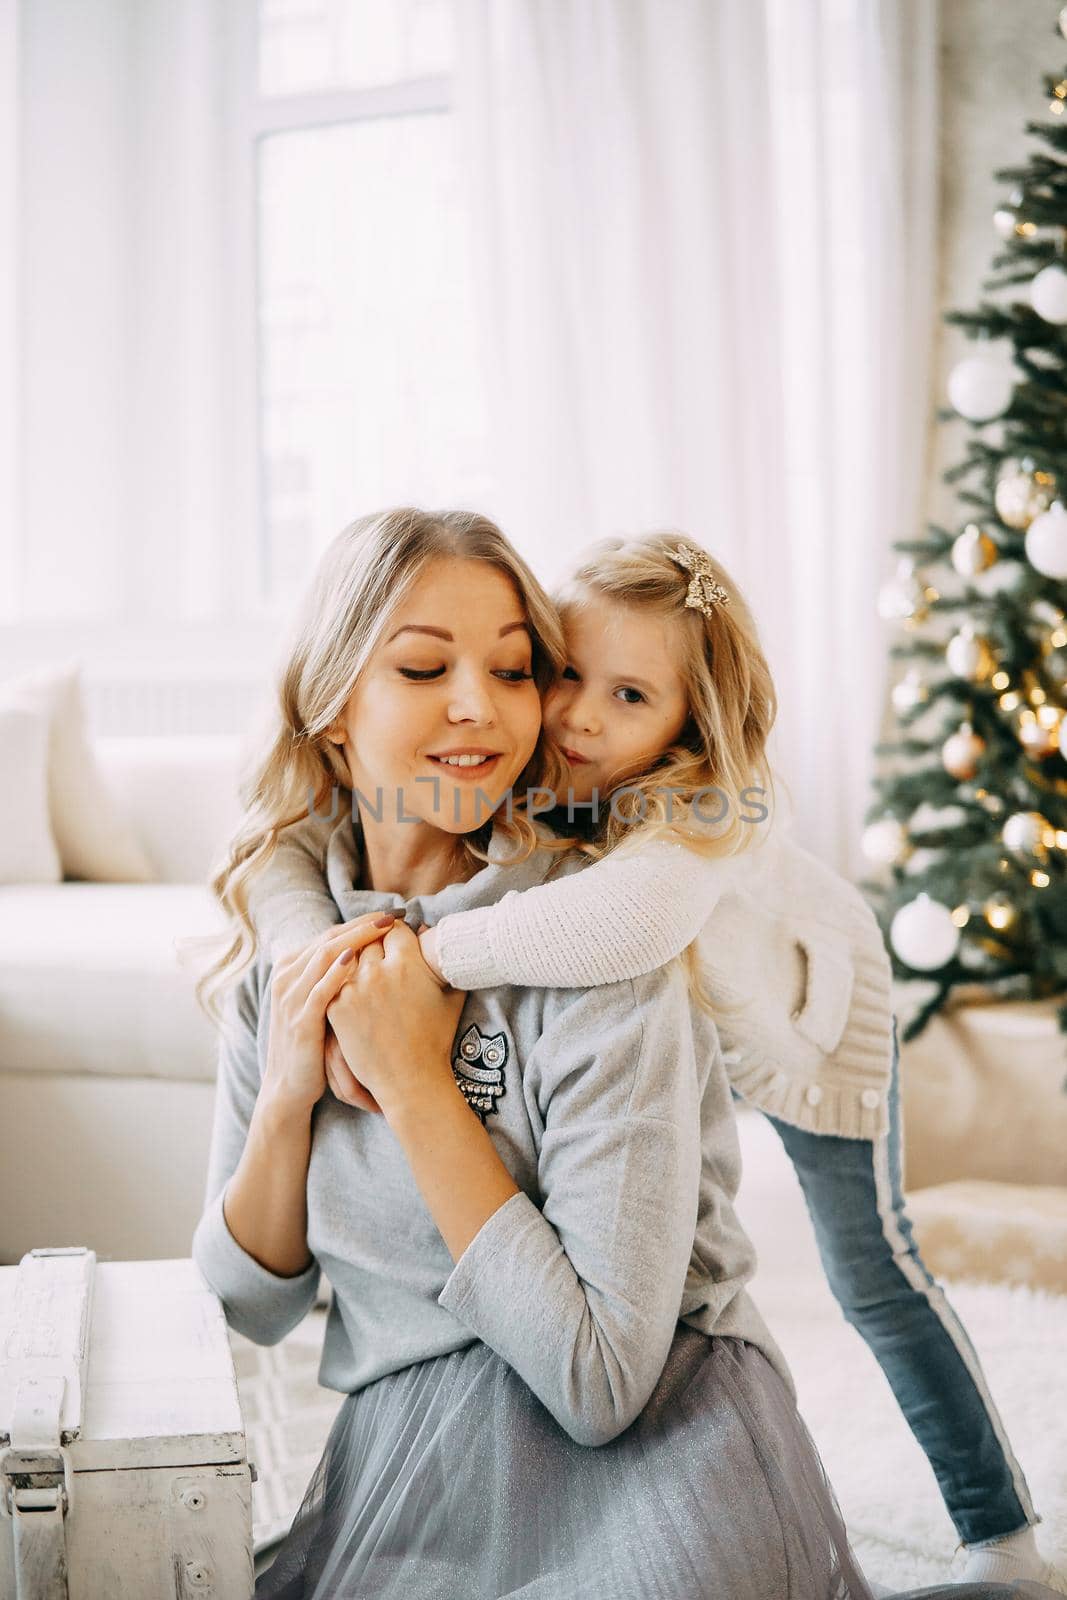 Happy family: mother and daughter. Family in a bright New Year's interior with a Christmas tree by Annu1tochka